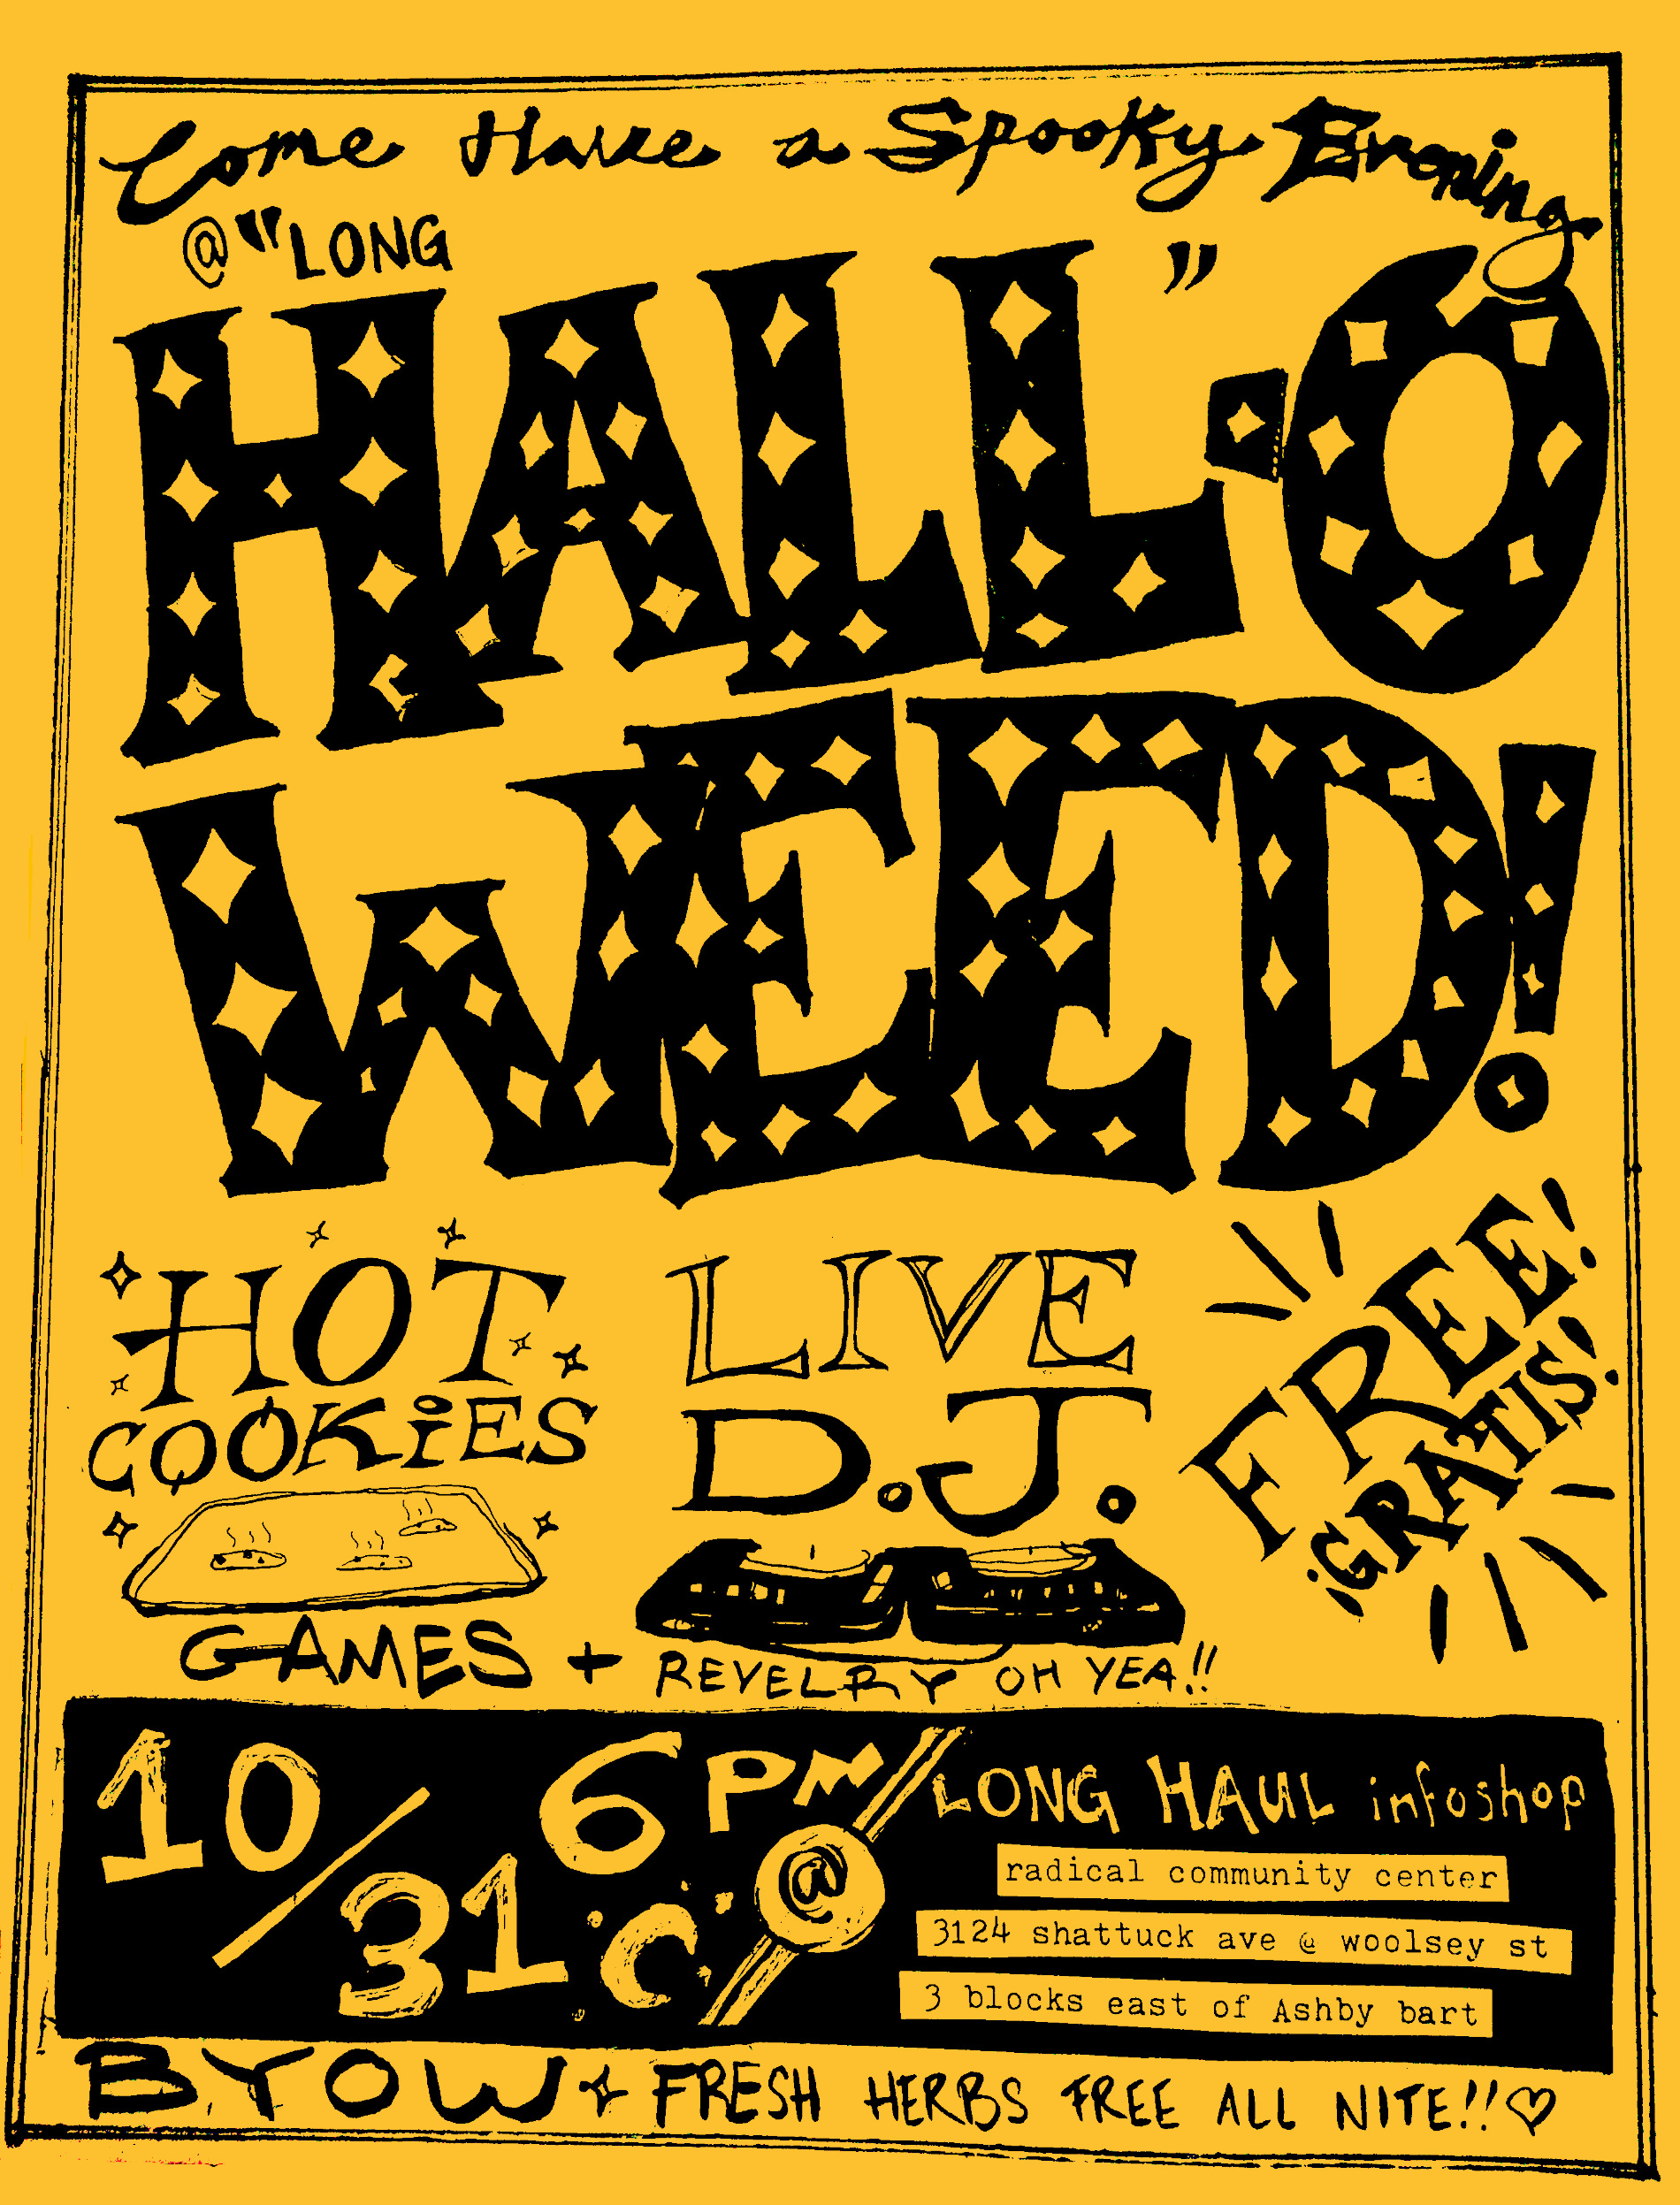 Join us on 10/31 for a spooky Haul-o-“Weed” Event!